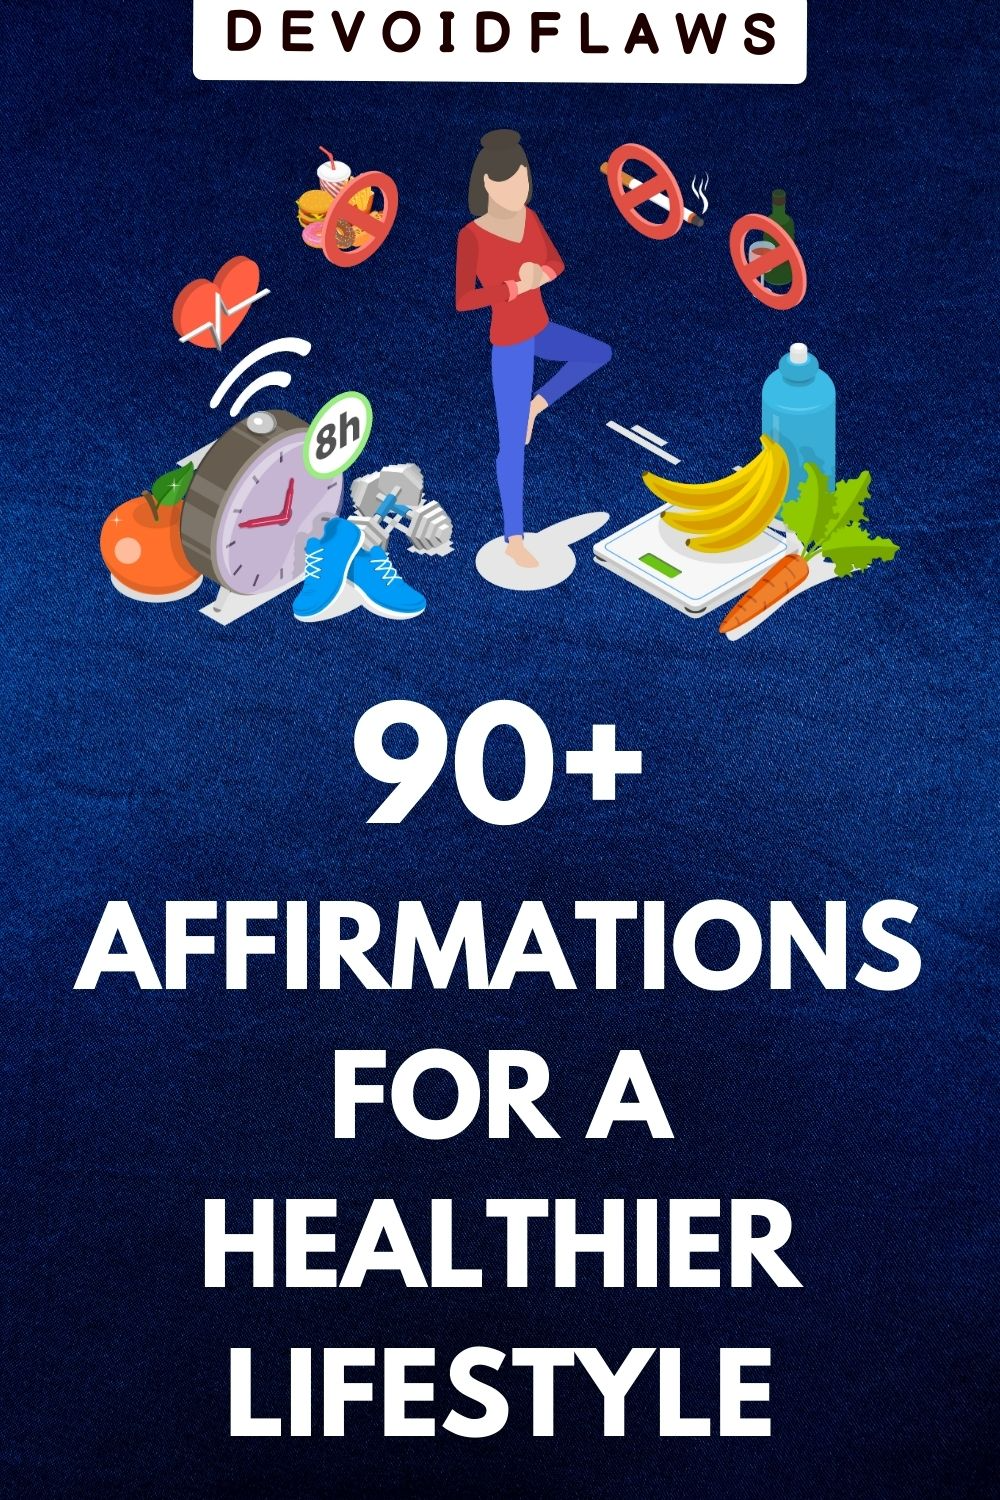 blue text image with text - 90+ affirmations for a healthier lifestyle